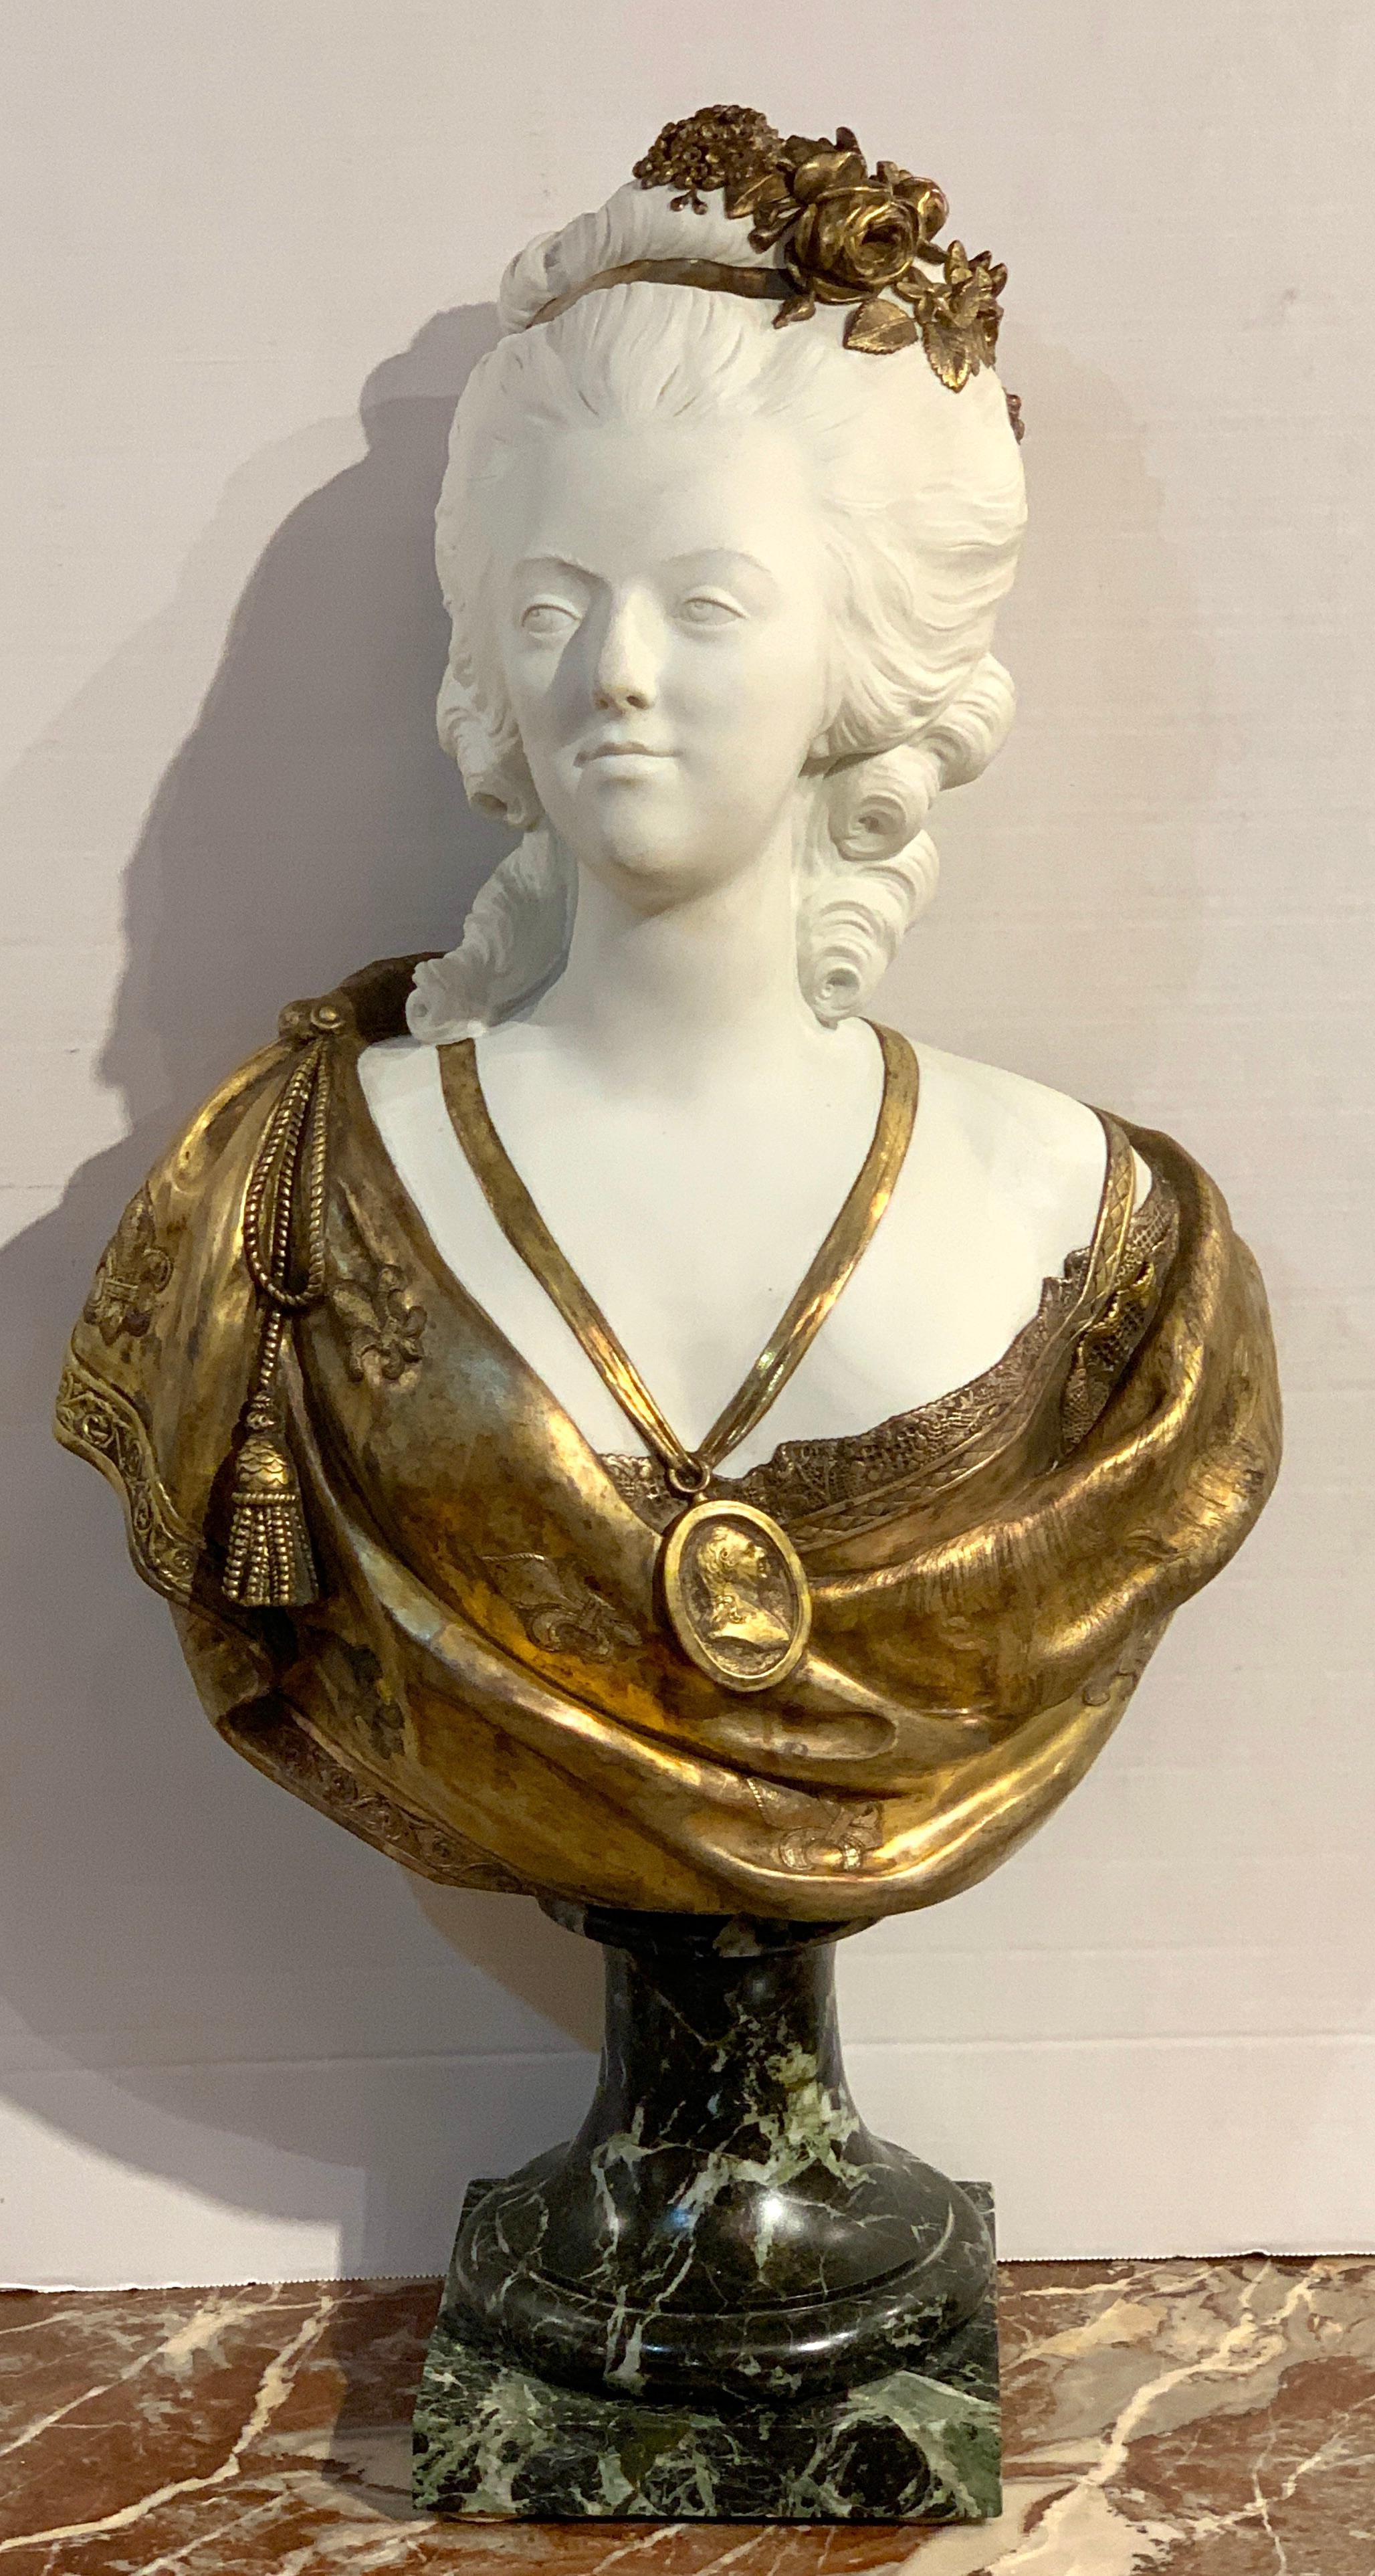 Sèvres Biscuit Porcelain and Ormolu Bust of Marie Antoinette after F. Lecomte For Sale 4